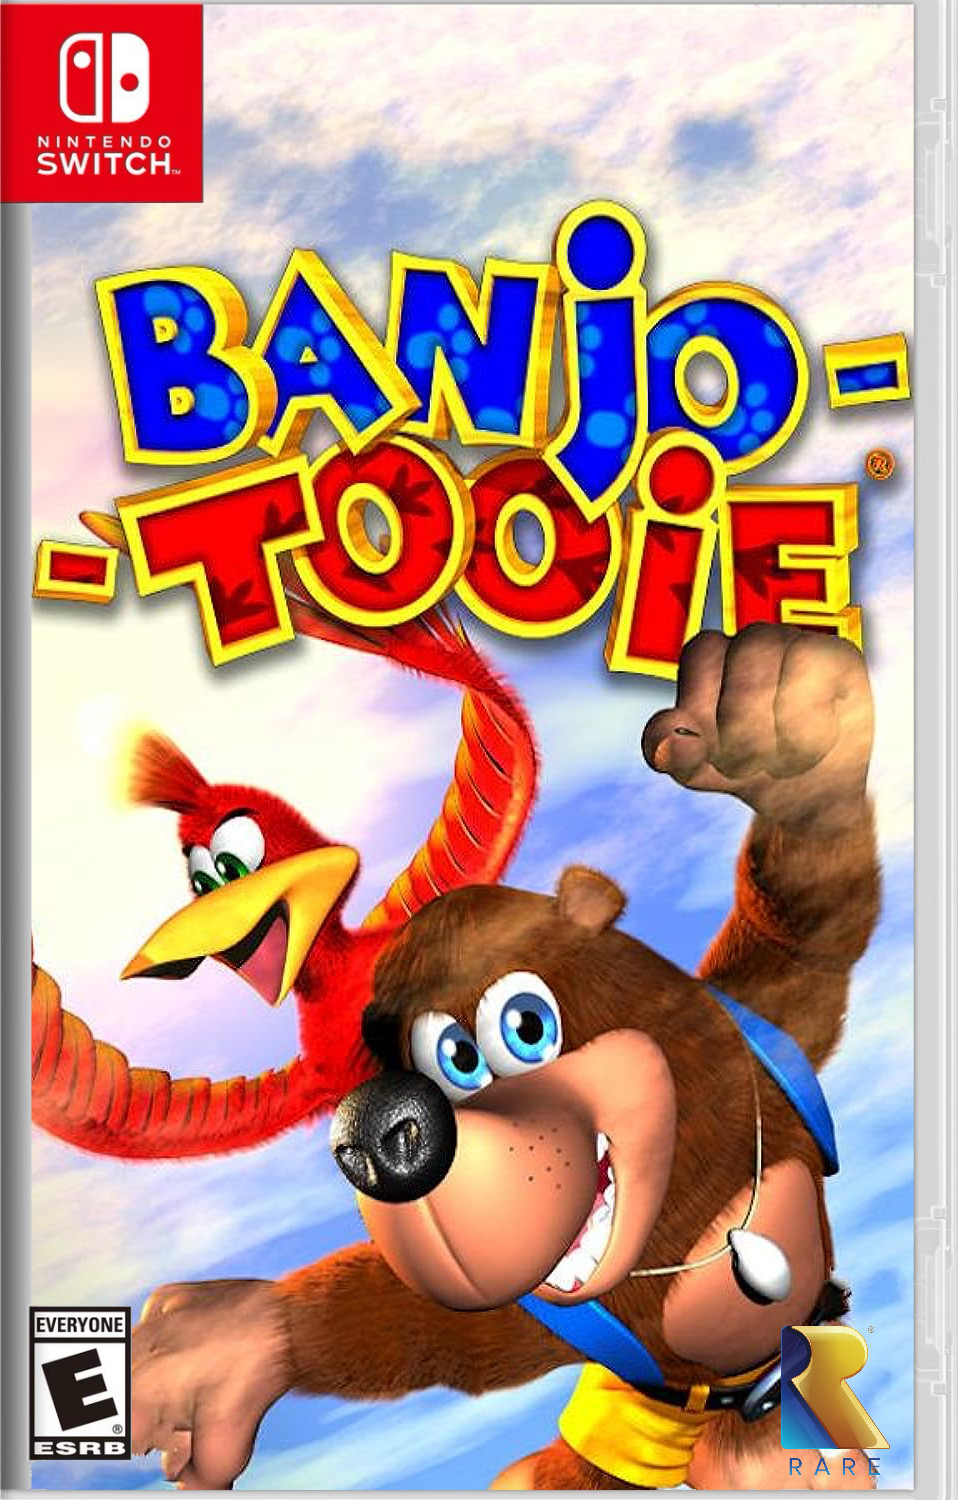 BANJO-REDOOIE! ON SWITCH! is my dream, let me have this